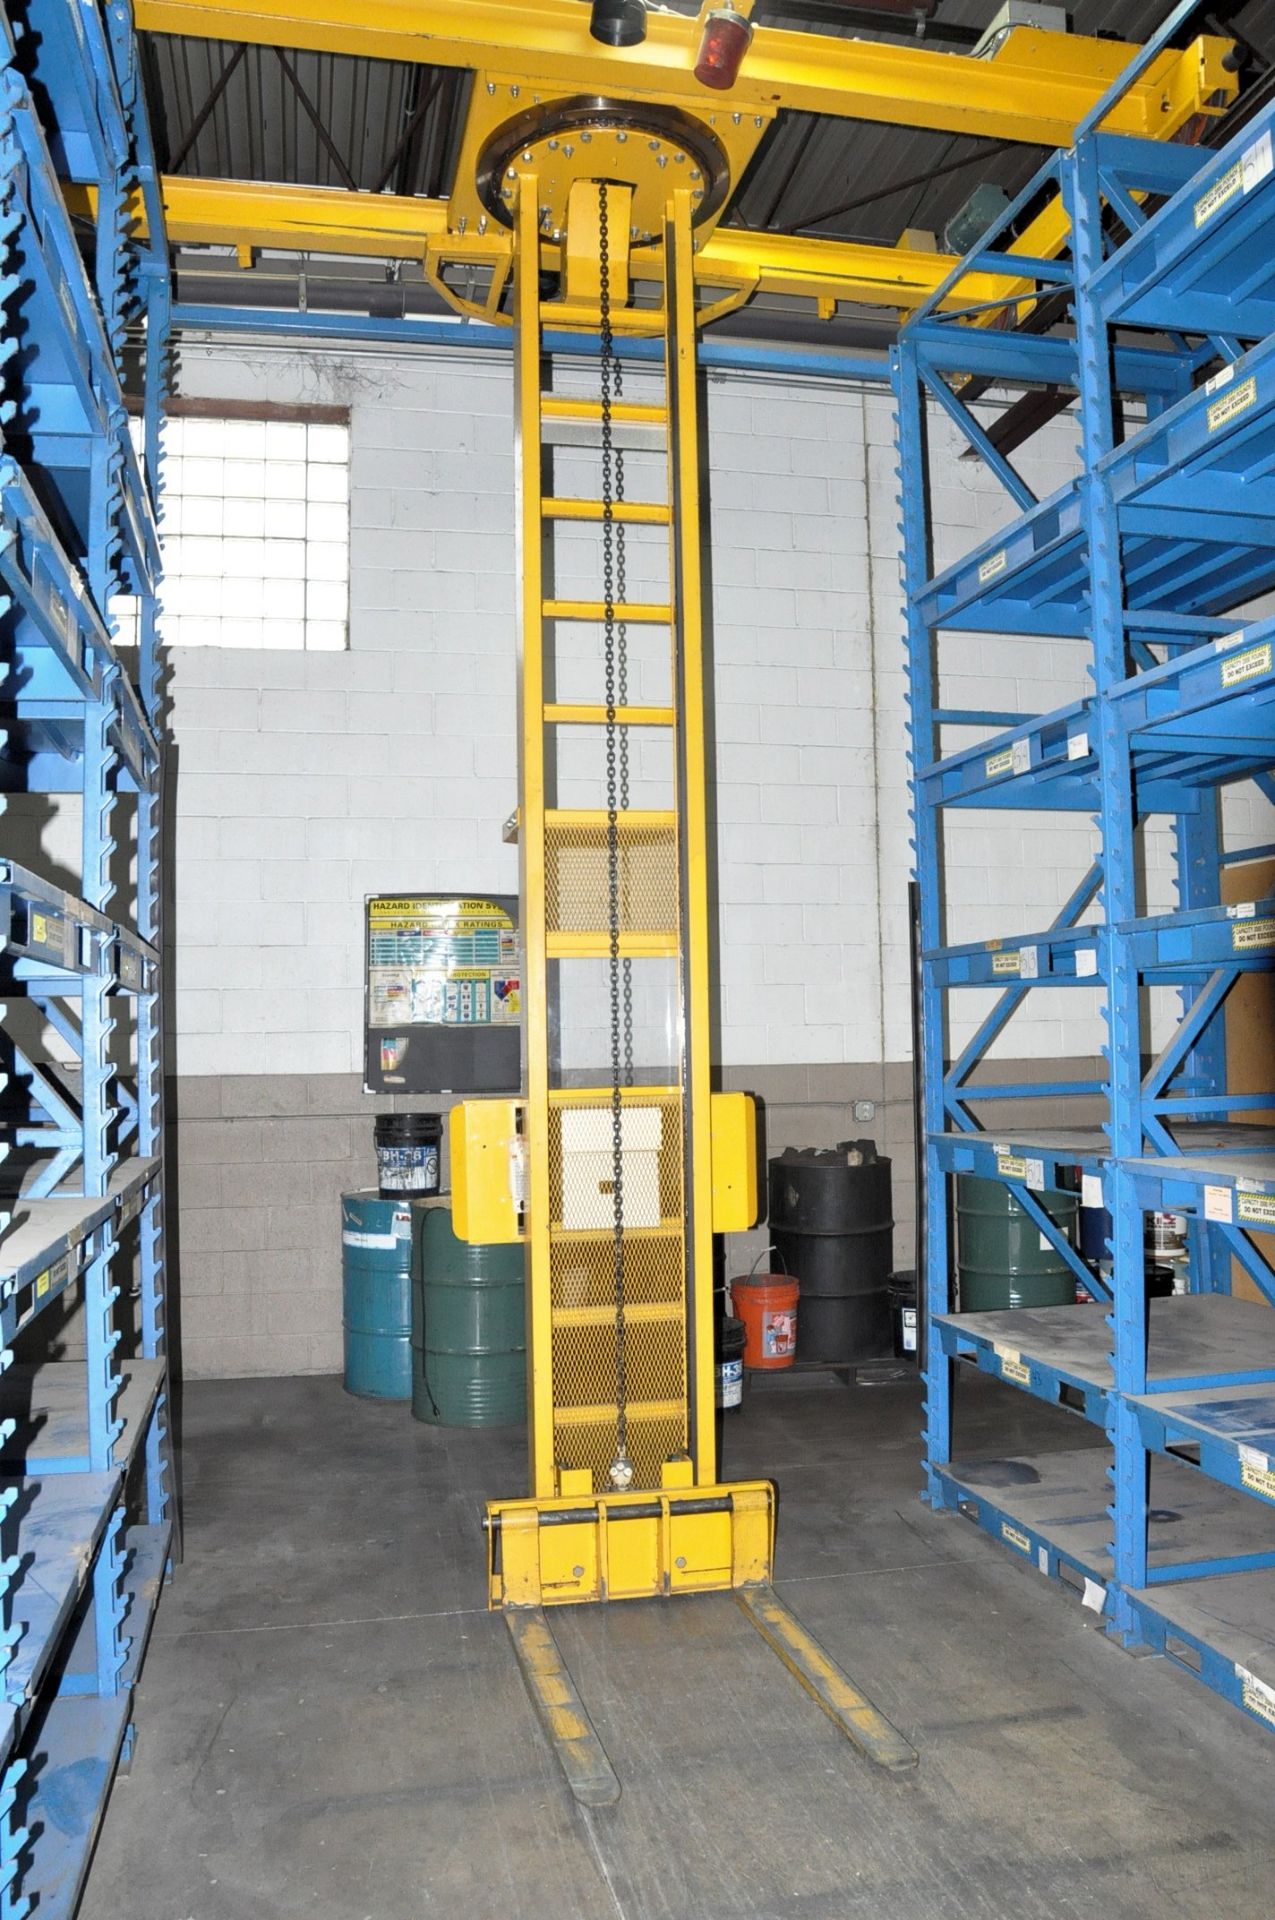 STANLEY STAK SYSTEM MODULAR RACK STACKING SYSTEM, 2,000-Lbs. Capacity Lift, (14) Sections Adjustable - Image 2 of 4